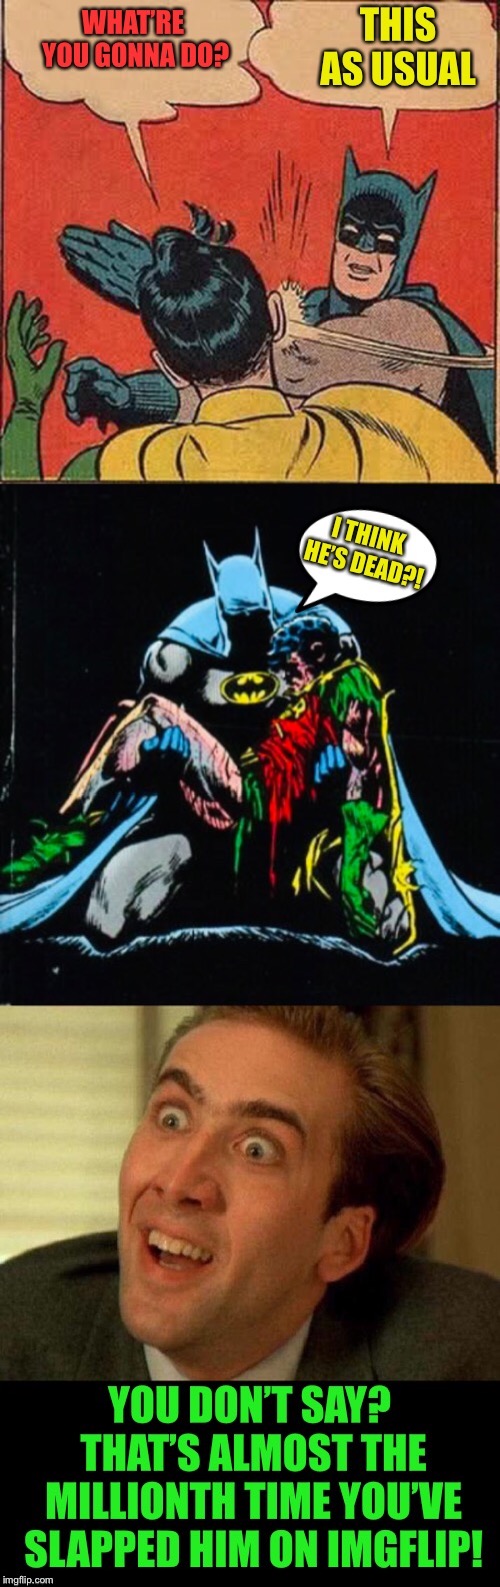 It was bound to happen sooner or later.  | image tagged in memes,batman slapping robin,you don't say,who wants to be a millionaire,batman,funny | made w/ Imgflip meme maker